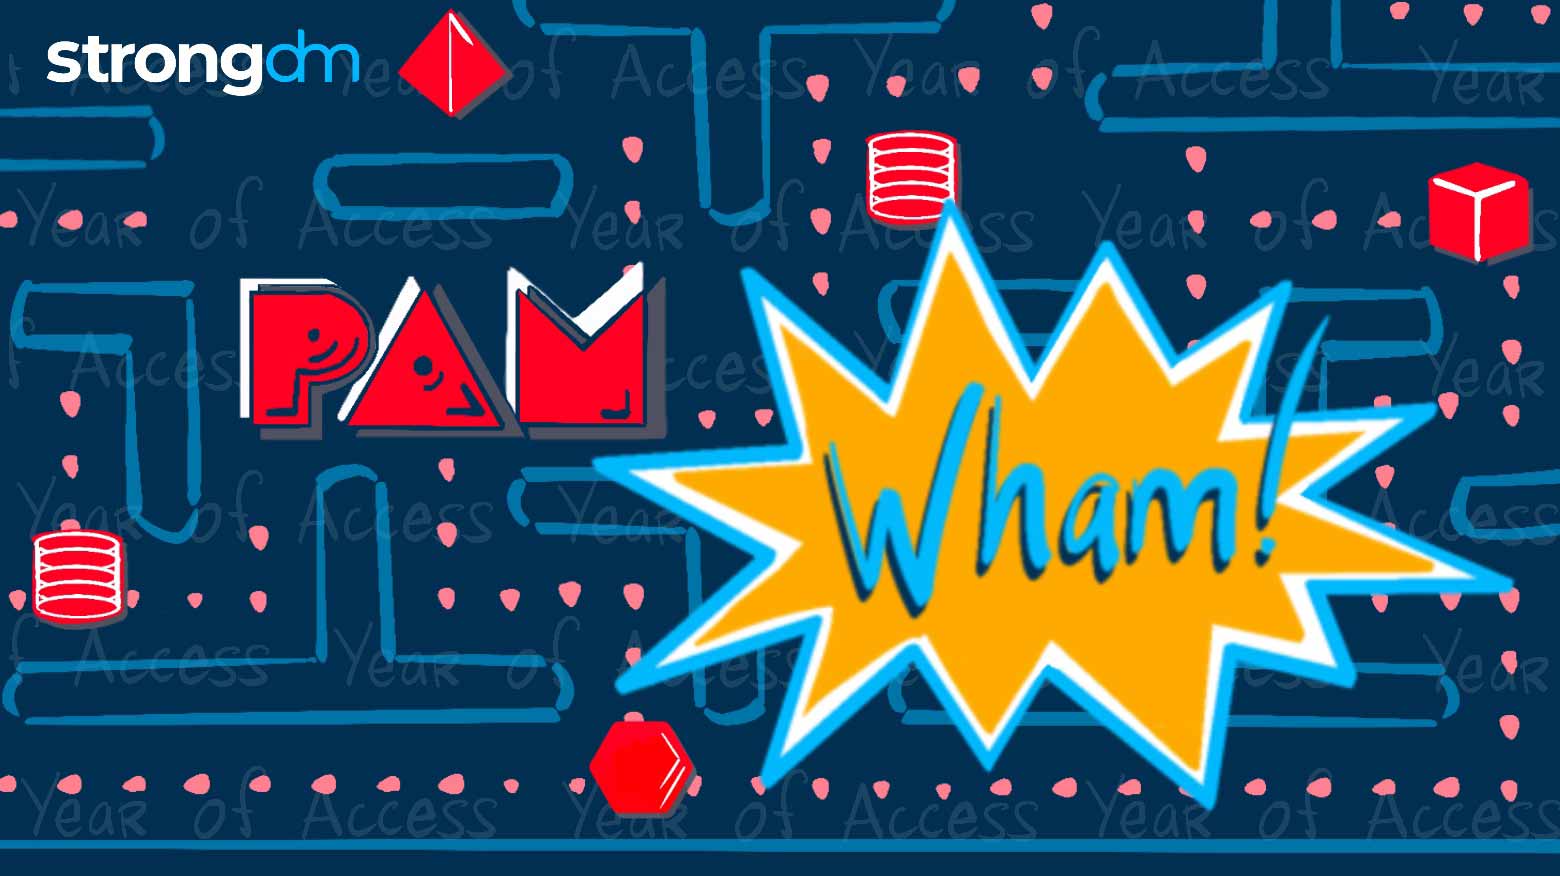 PAM inside of a Pac-man styled interface with the caption "Wham!"